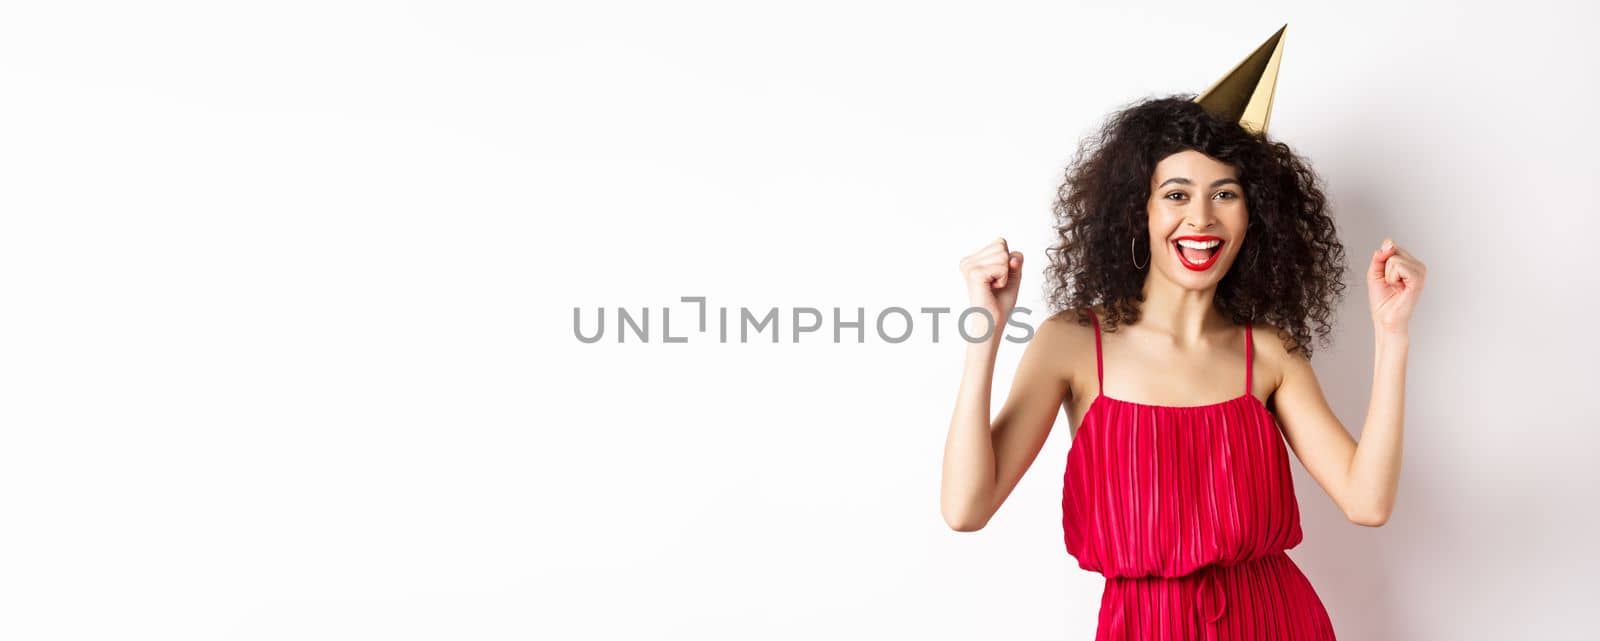 Birthday girl in party hat having fun, dancing in red dress and chanting, standing against white background.